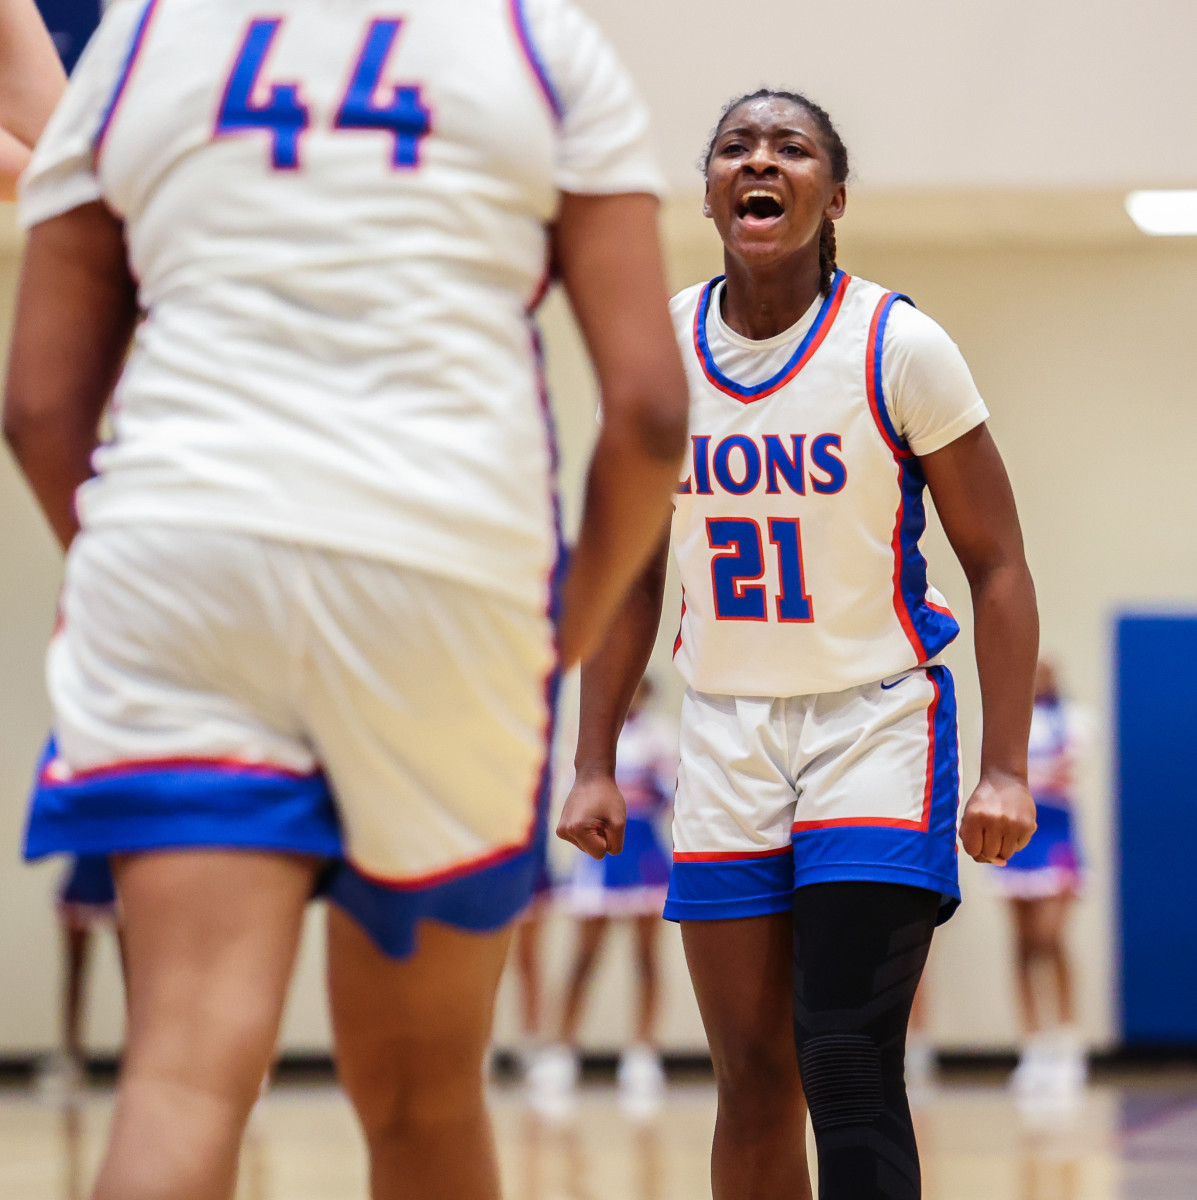 Peachtree Ridge's Sanaa Tripp (21) lets out a celebratory yell in the direction of teammate Aaliyah Hunt (13). The two combined for 32 points, with netting a team-high 19.